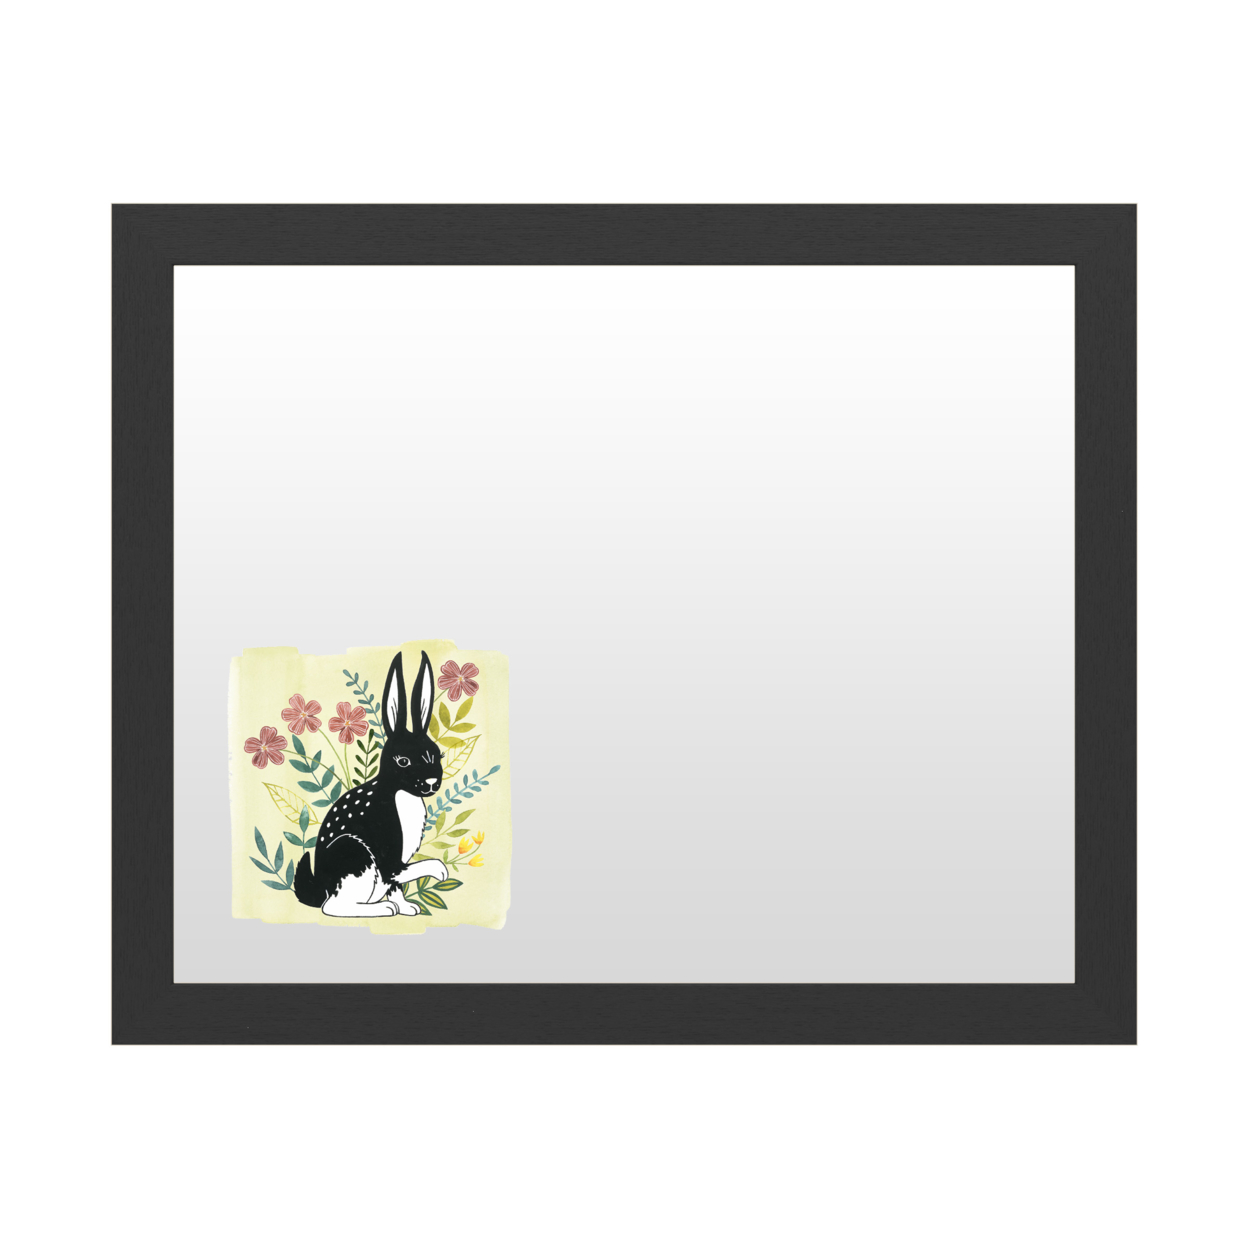 Dry Erase 16 X 20 Marker Board With Printed Artwork - Grace Popp Floral Forester IV White Board - Ready To Hang